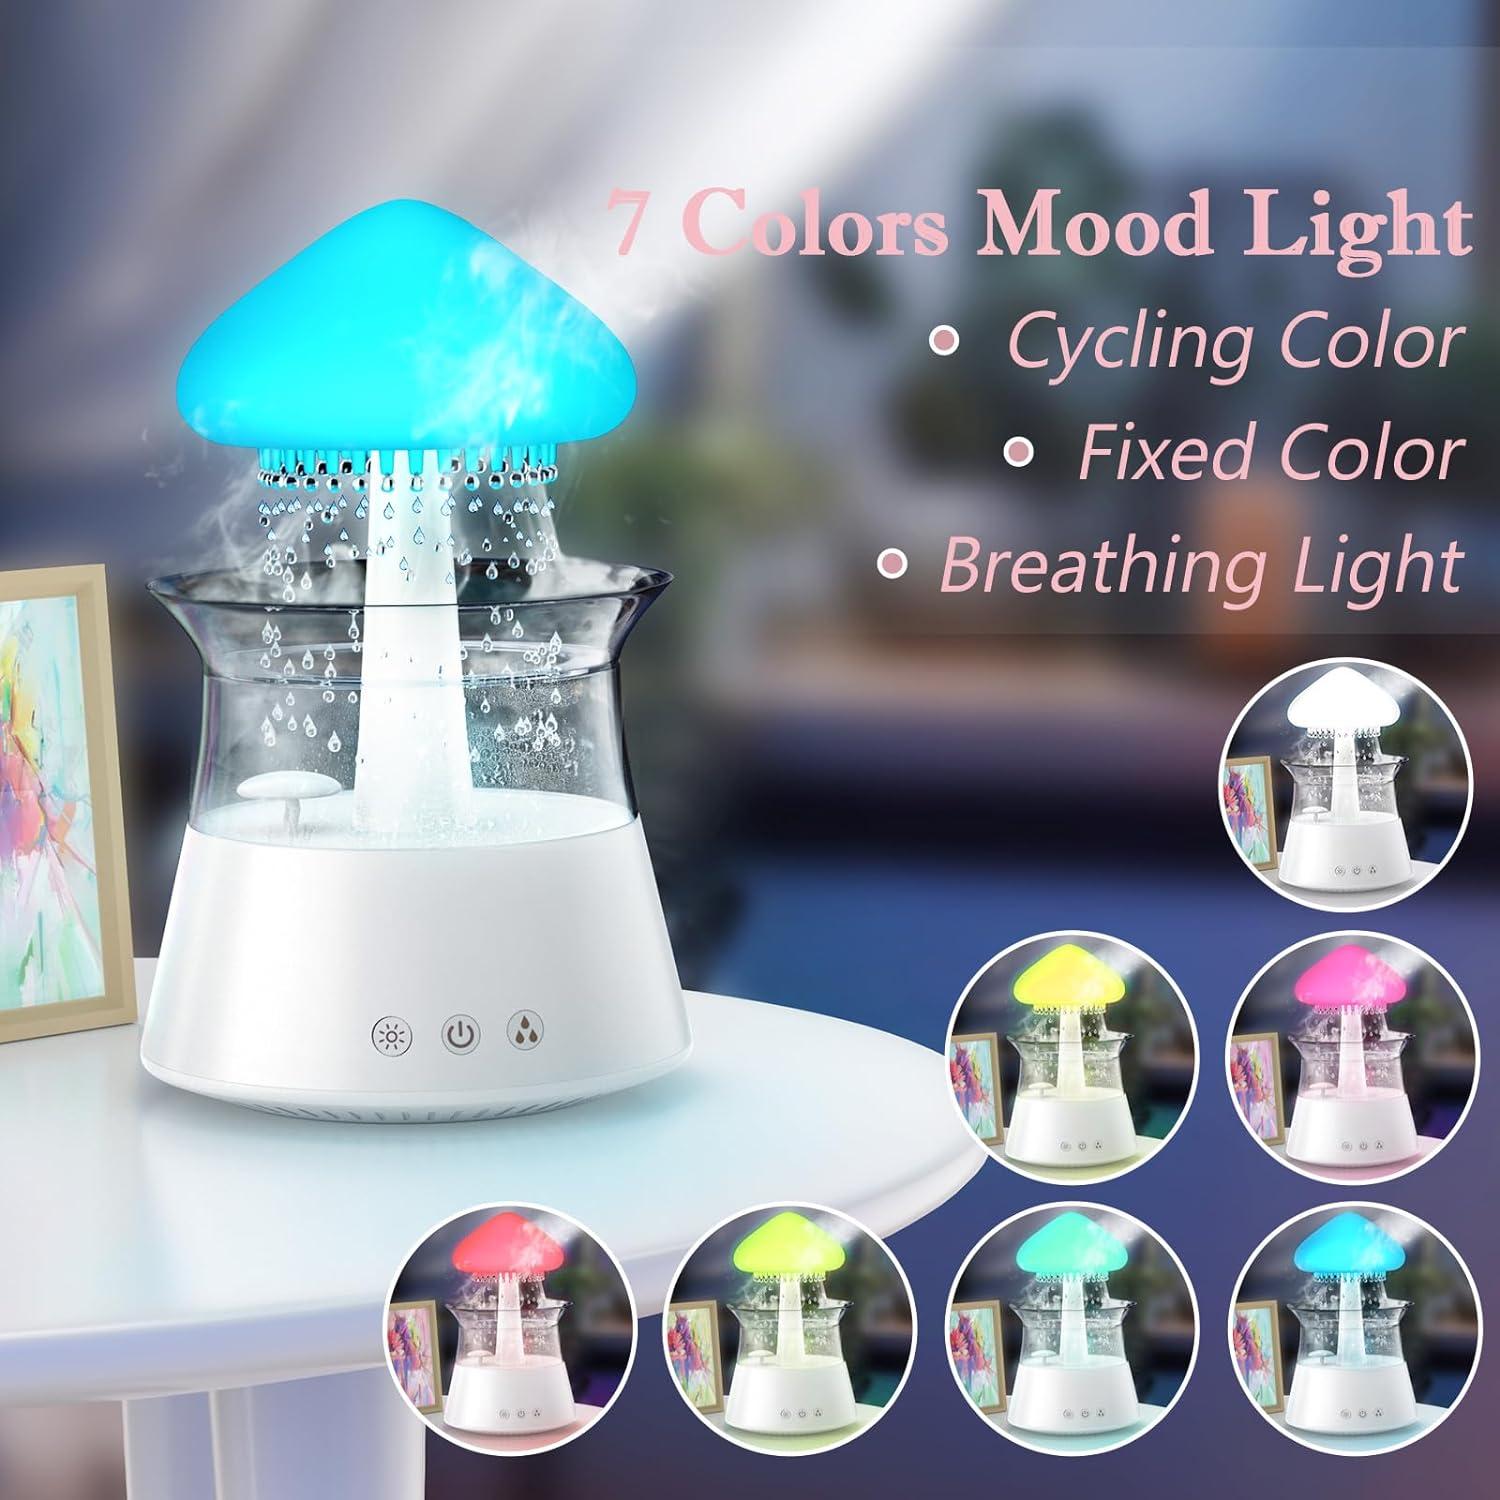 Rain Cloud Humidifiers for Bedroom 300ml - Essential Oil Diffuser